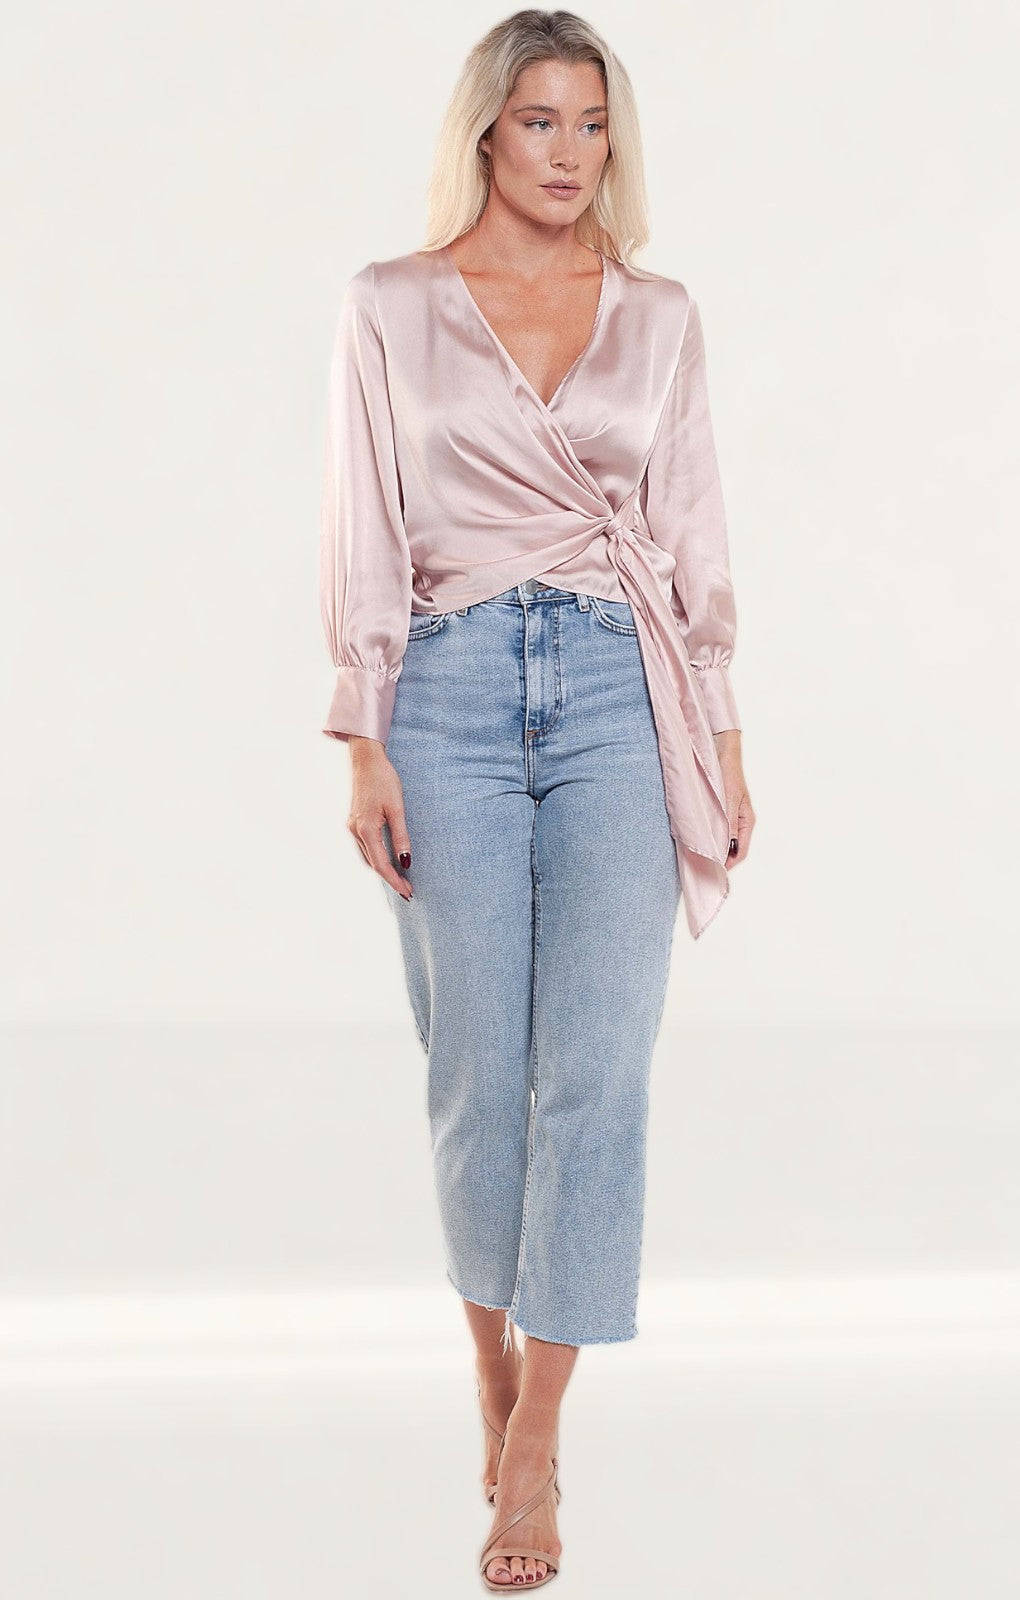 Zara Pink Satin Crossover Top product image